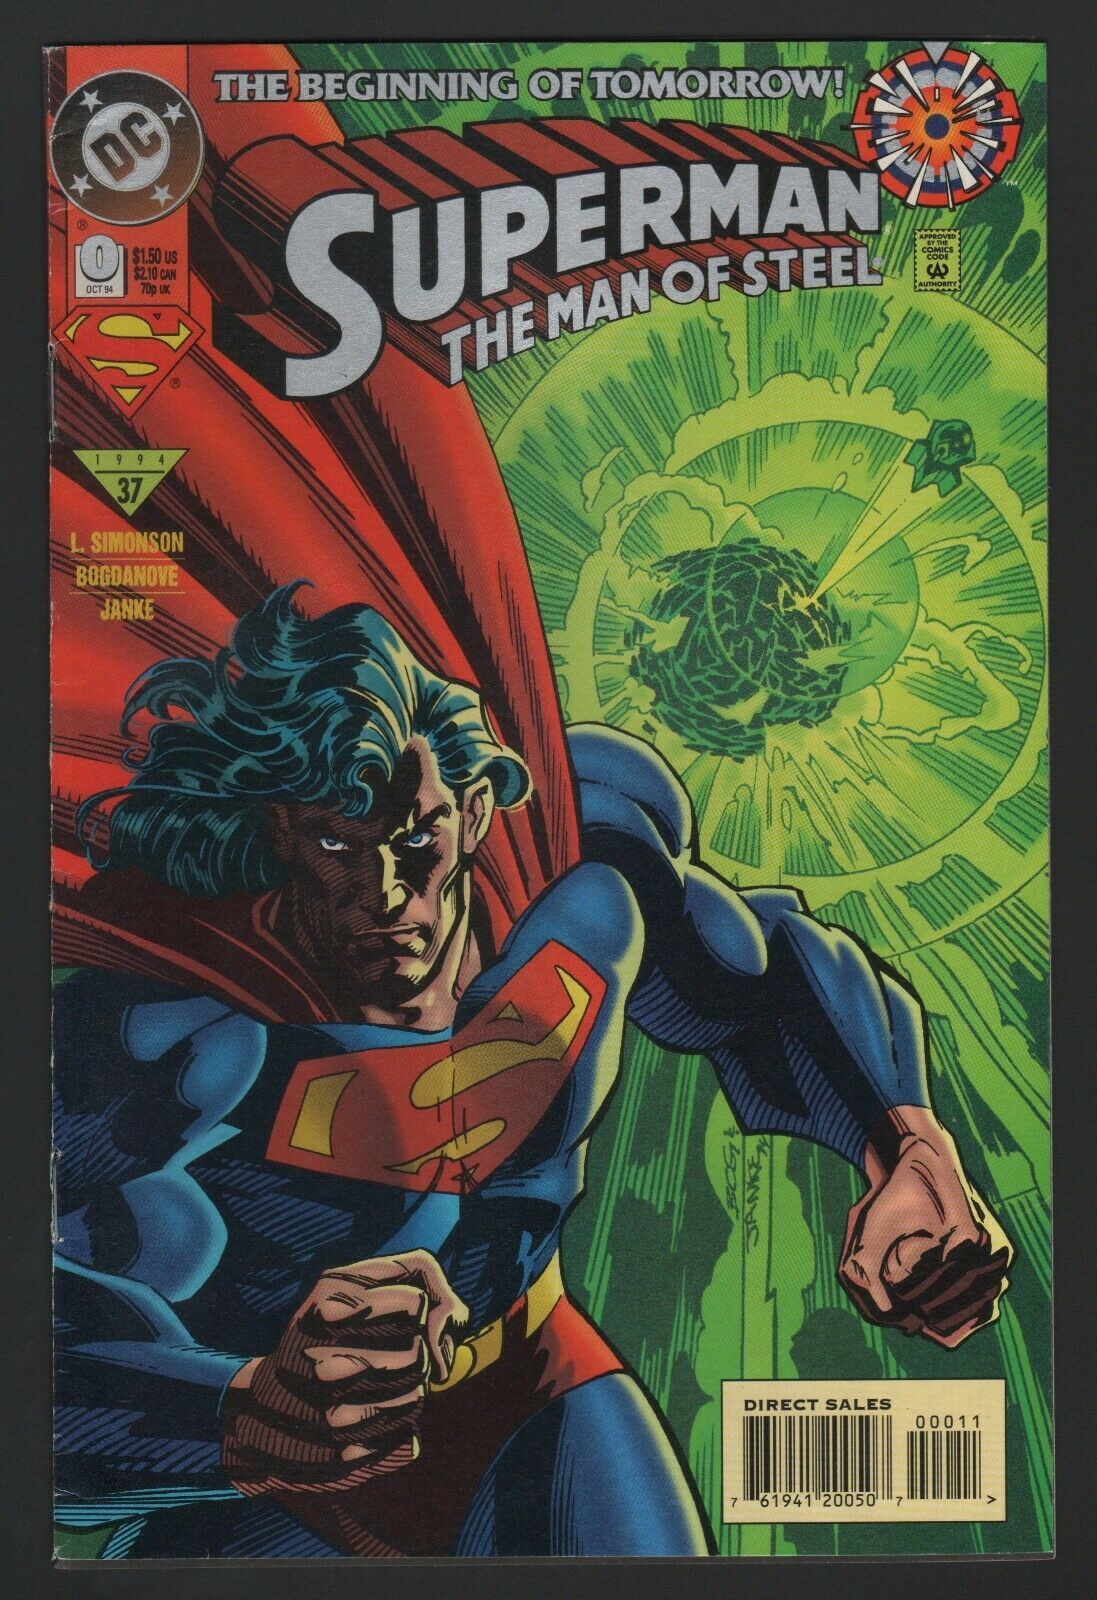 SUPERMAN: THE MAN OF STEEL #0, 1994, DC, FN/VF, THE BEGINNING OF TOMORROW! - $2.97